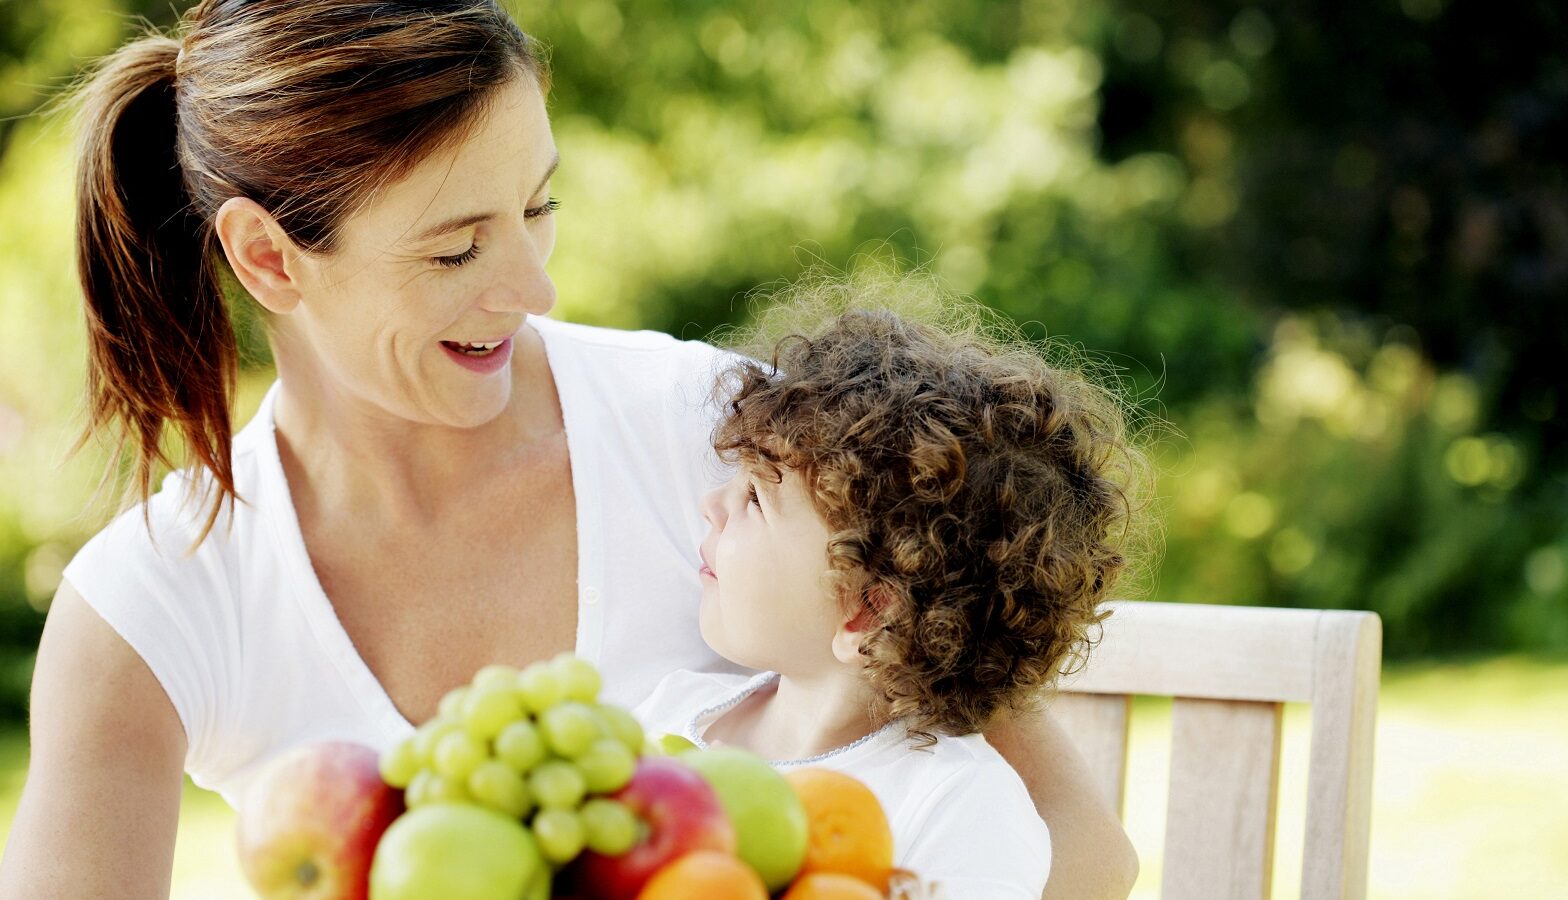 Healthy woman and son sitting outside in front of bowl of fruit